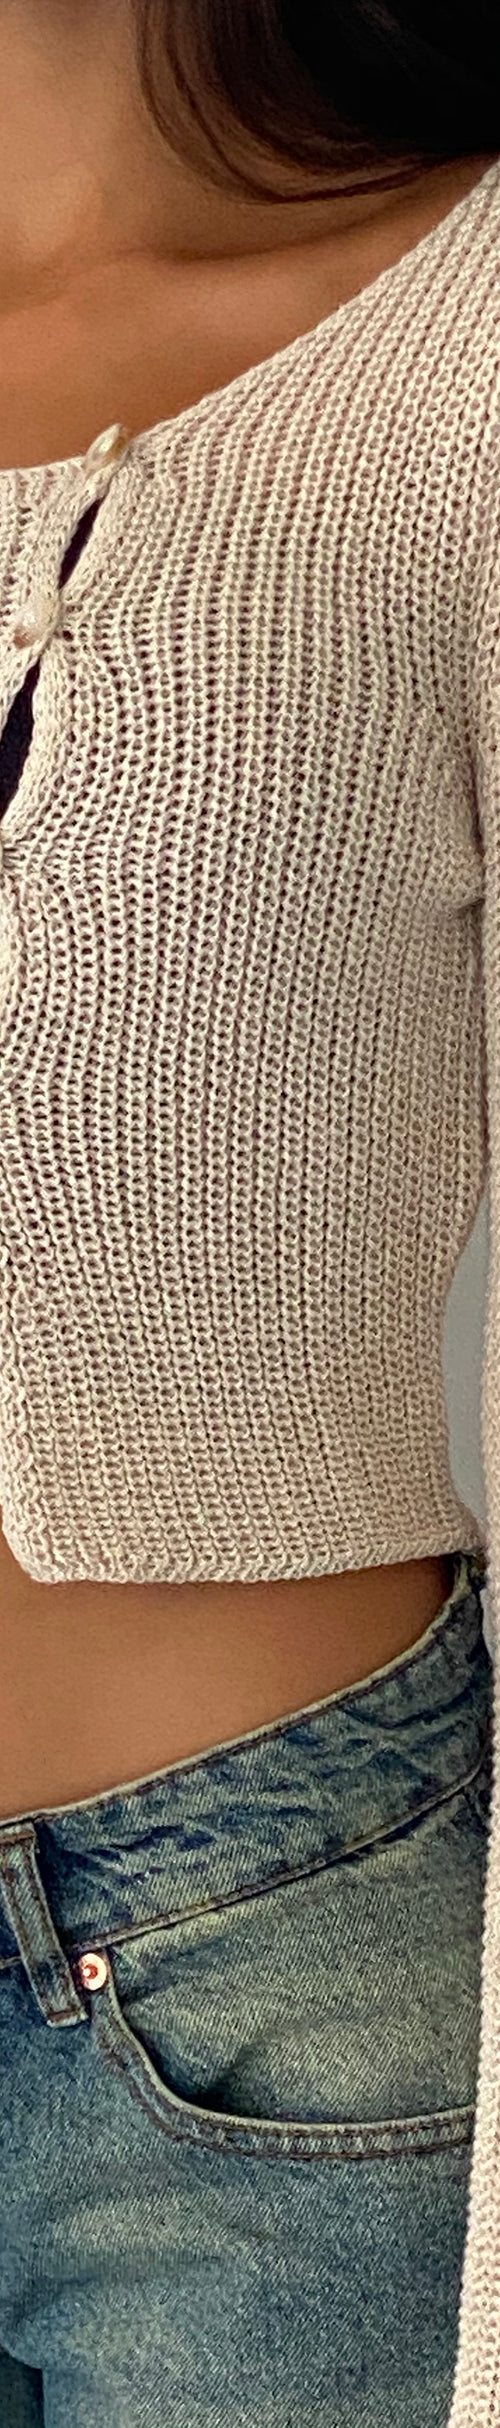 Image of Kazayo Long Sleeve Knit Top in Natural